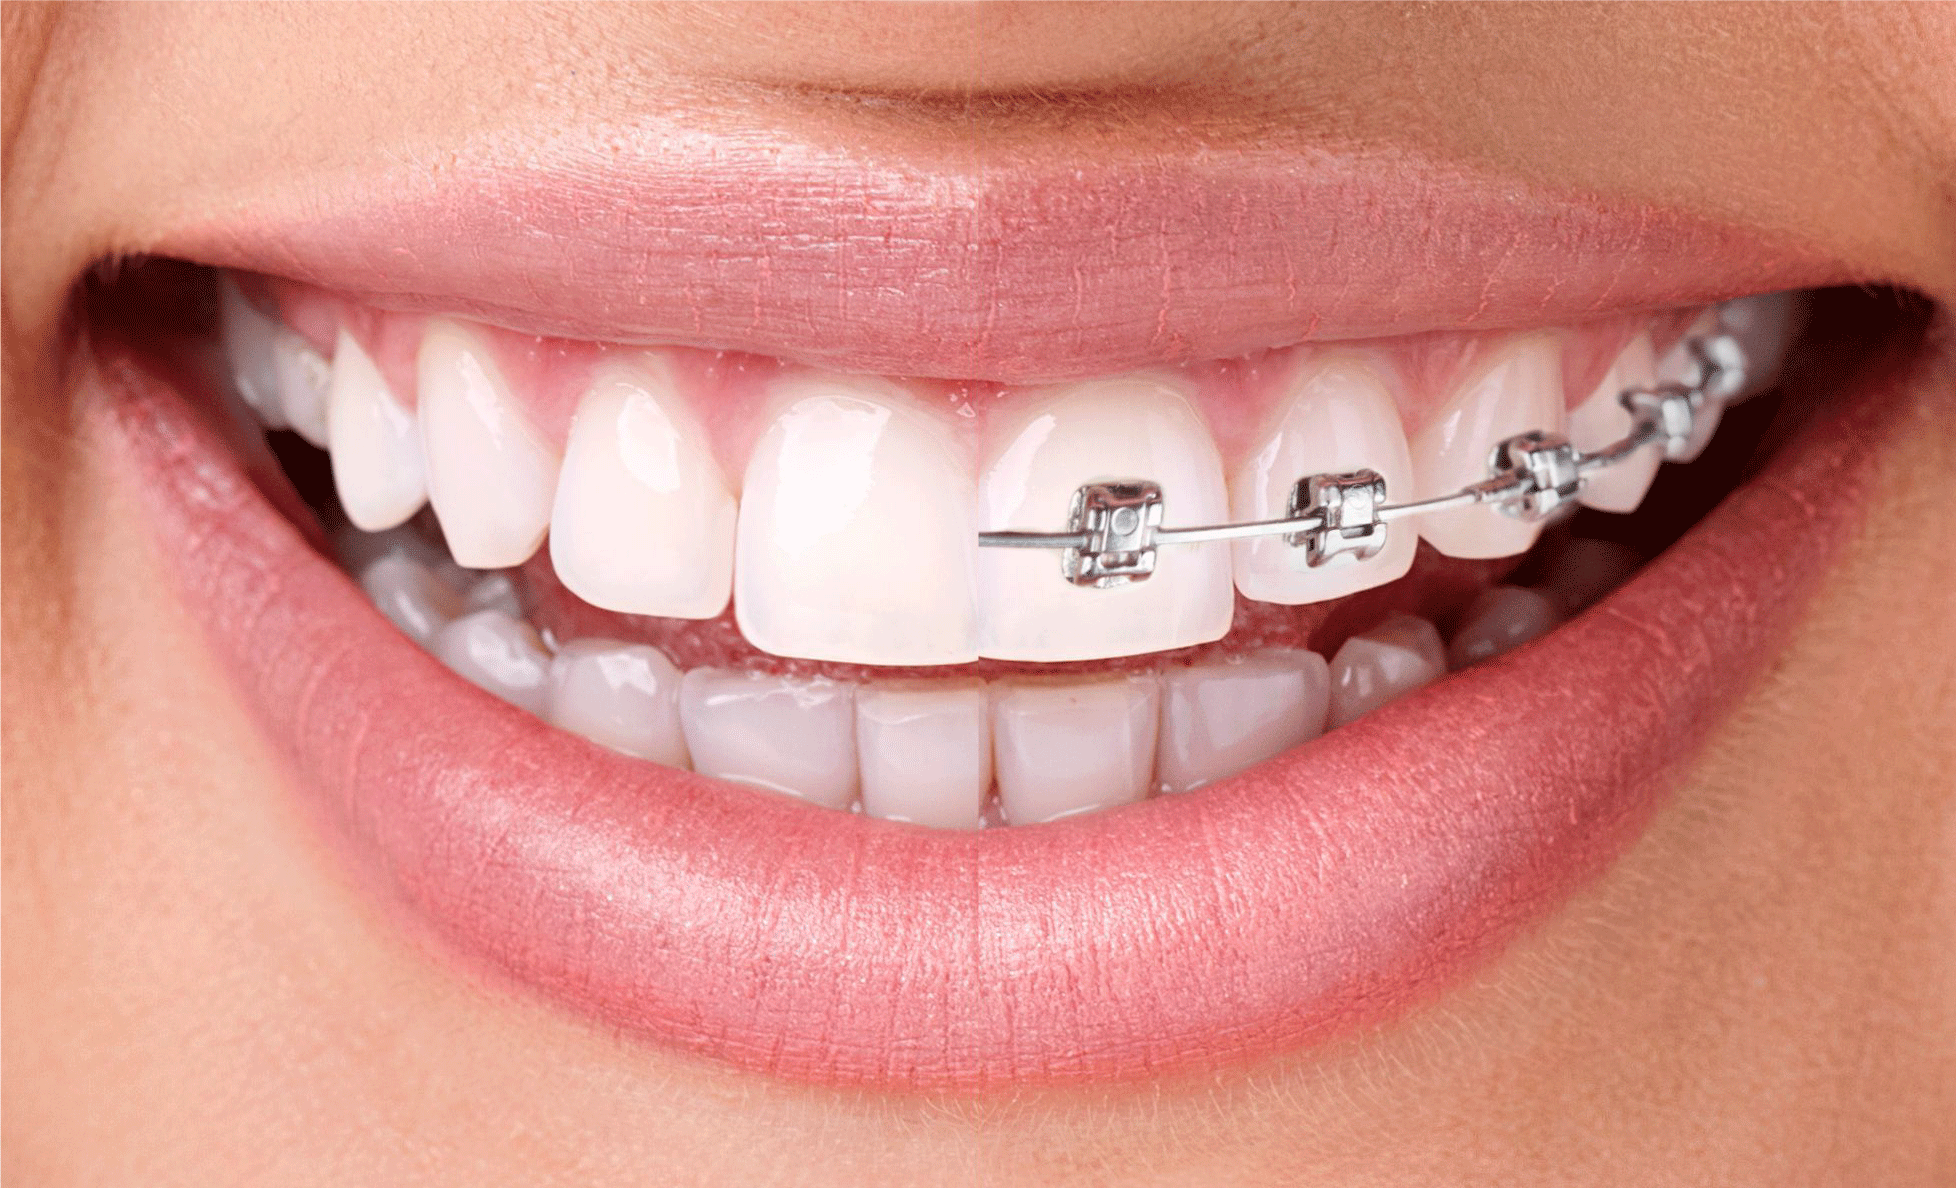 Braces Rubber Bands - Purpose, Effects, Downsides, Results